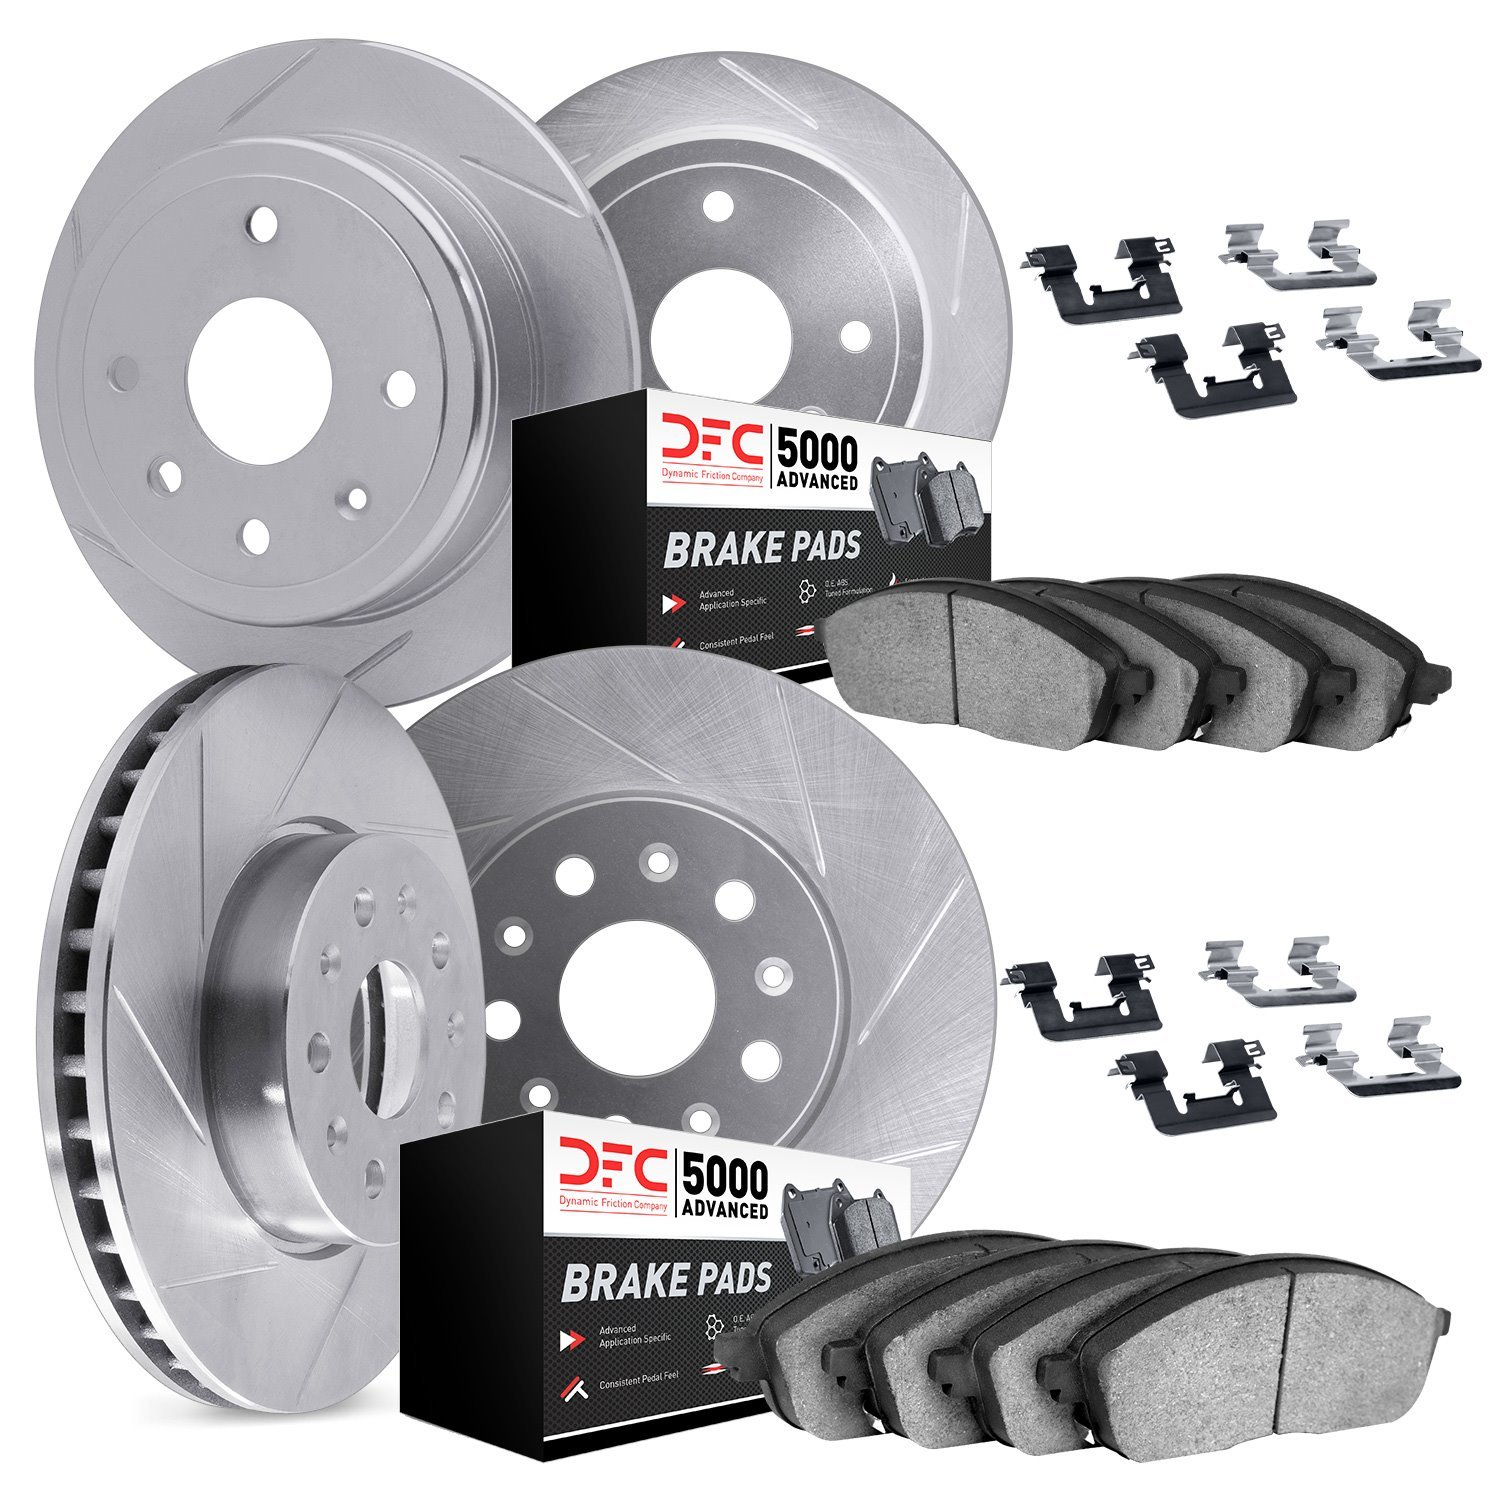 5514-63080 Slotted Brake Rotors w/5000 Advanced Brake Pads Kit & Hardware [Silver], 1998-2005 Mercedes-Benz, Position: Front and